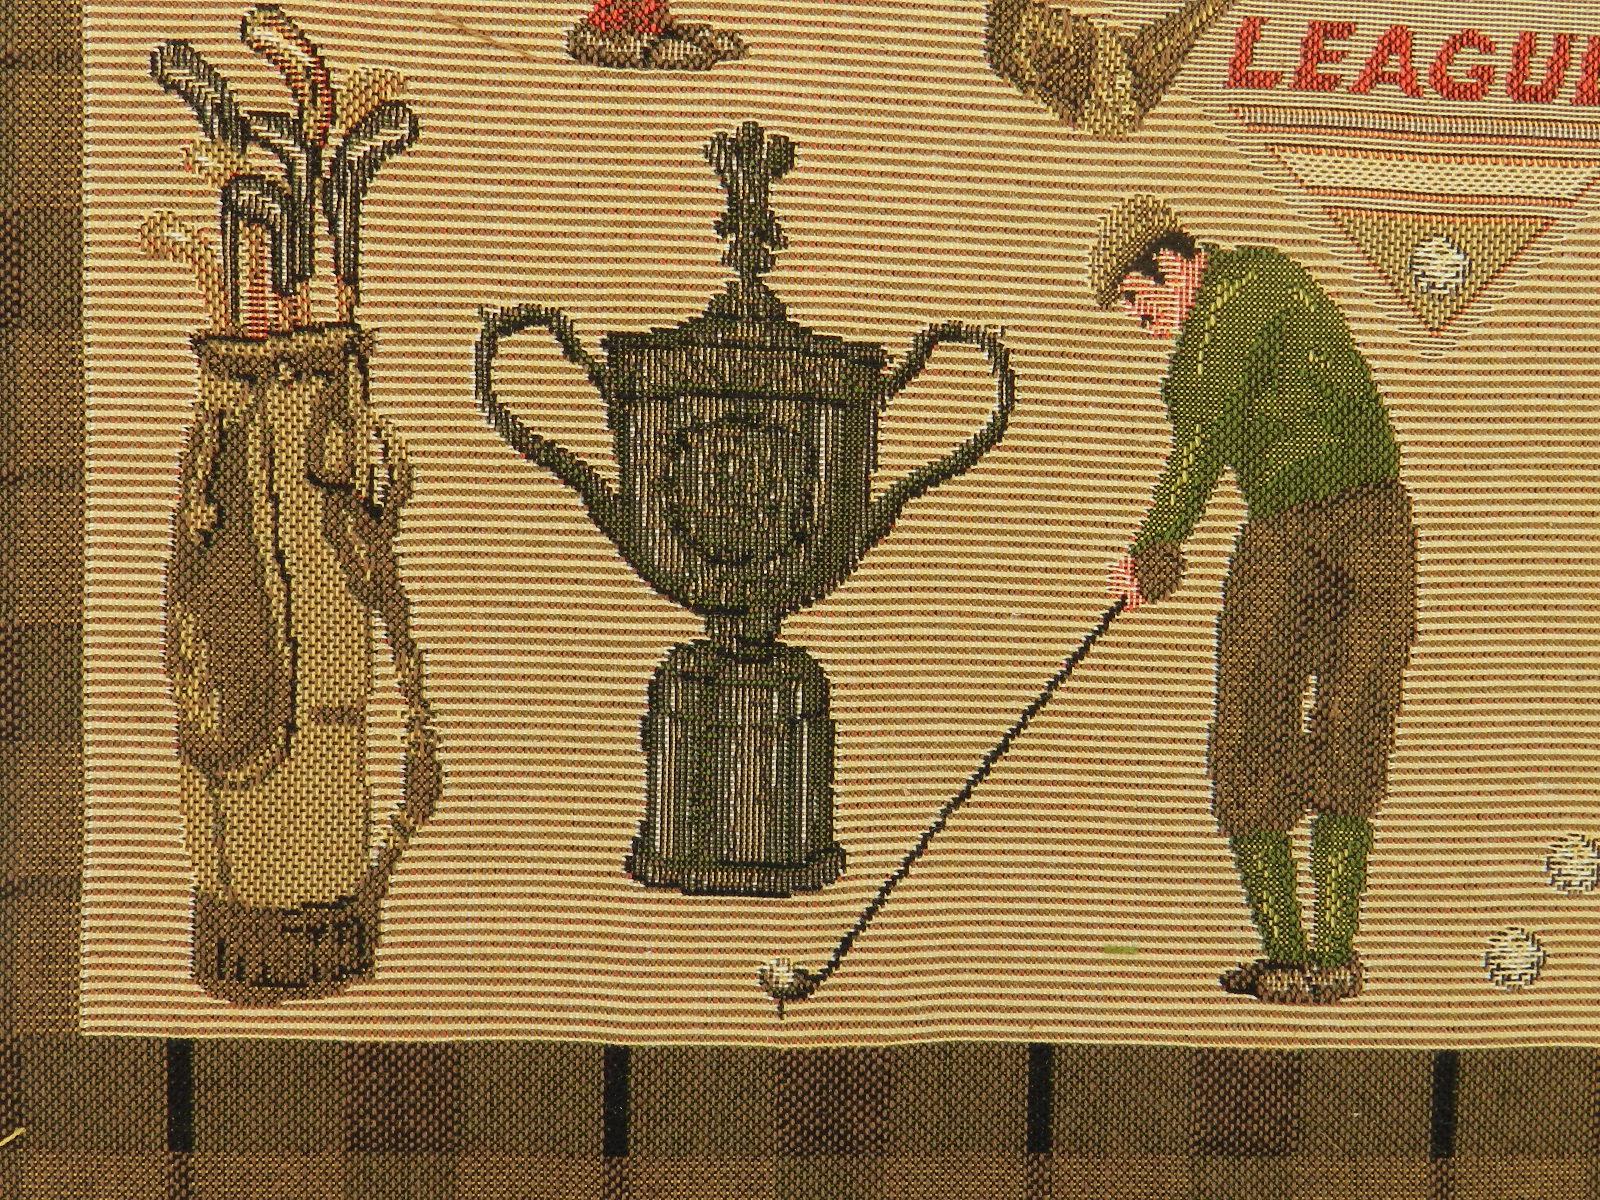 American Midcentury Golf US Open Commemorative Picture Tapestry New England League c1955